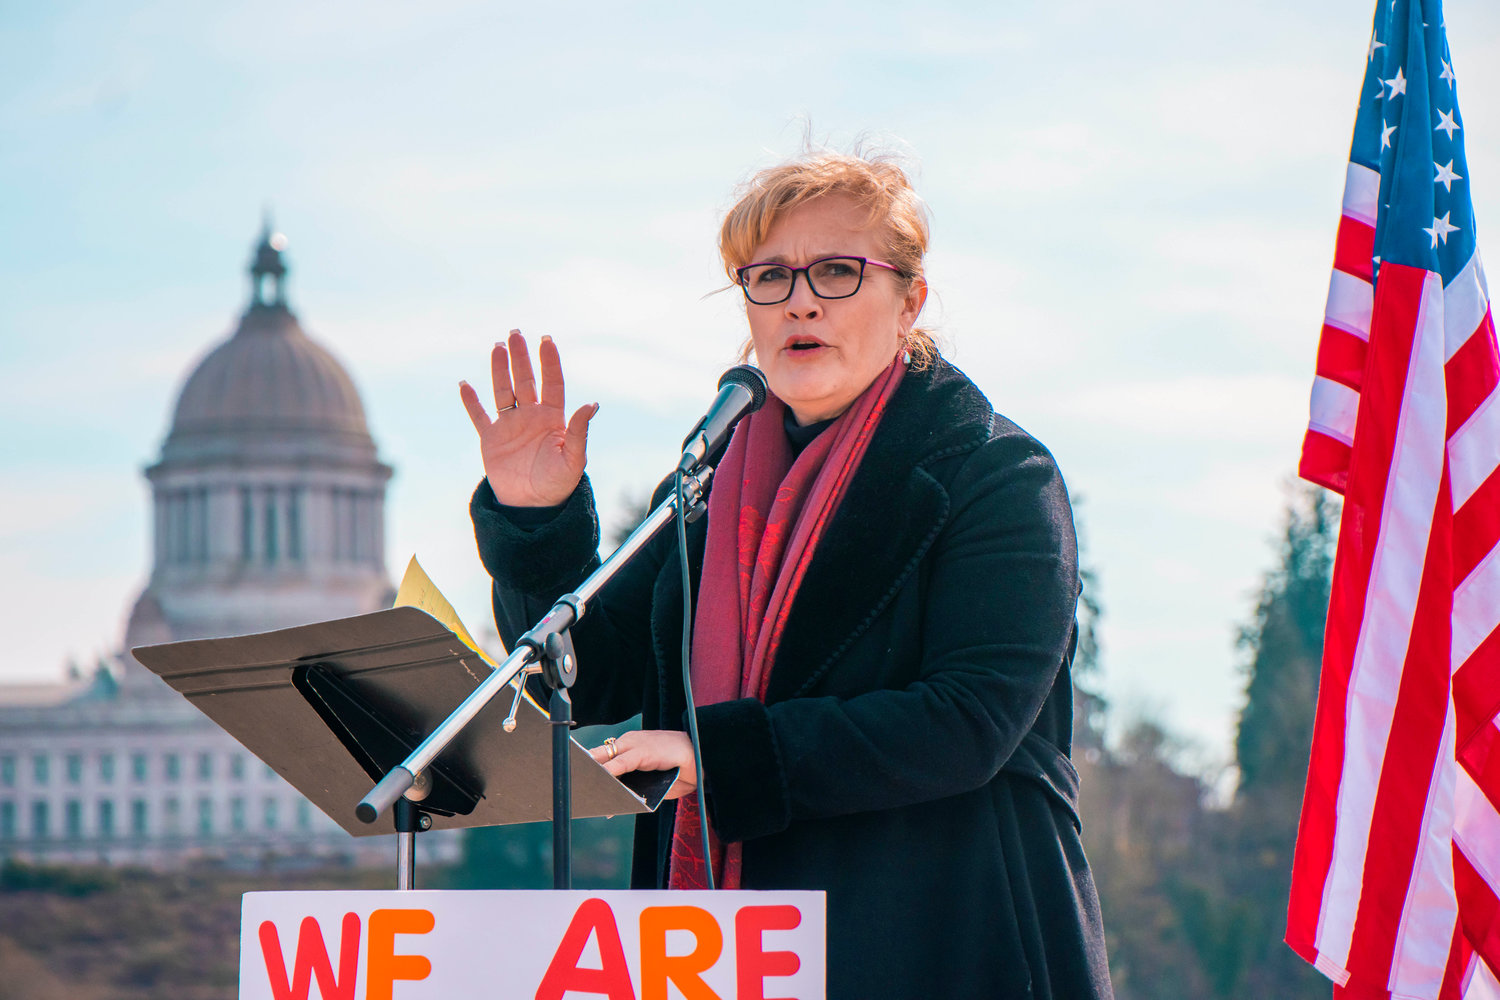 Michelle Darnell, President of the Ignite Foundation LLC, speaks during a rally in support of bringing back in-person schooling near Capitol Lake on Saturday in Olympia.